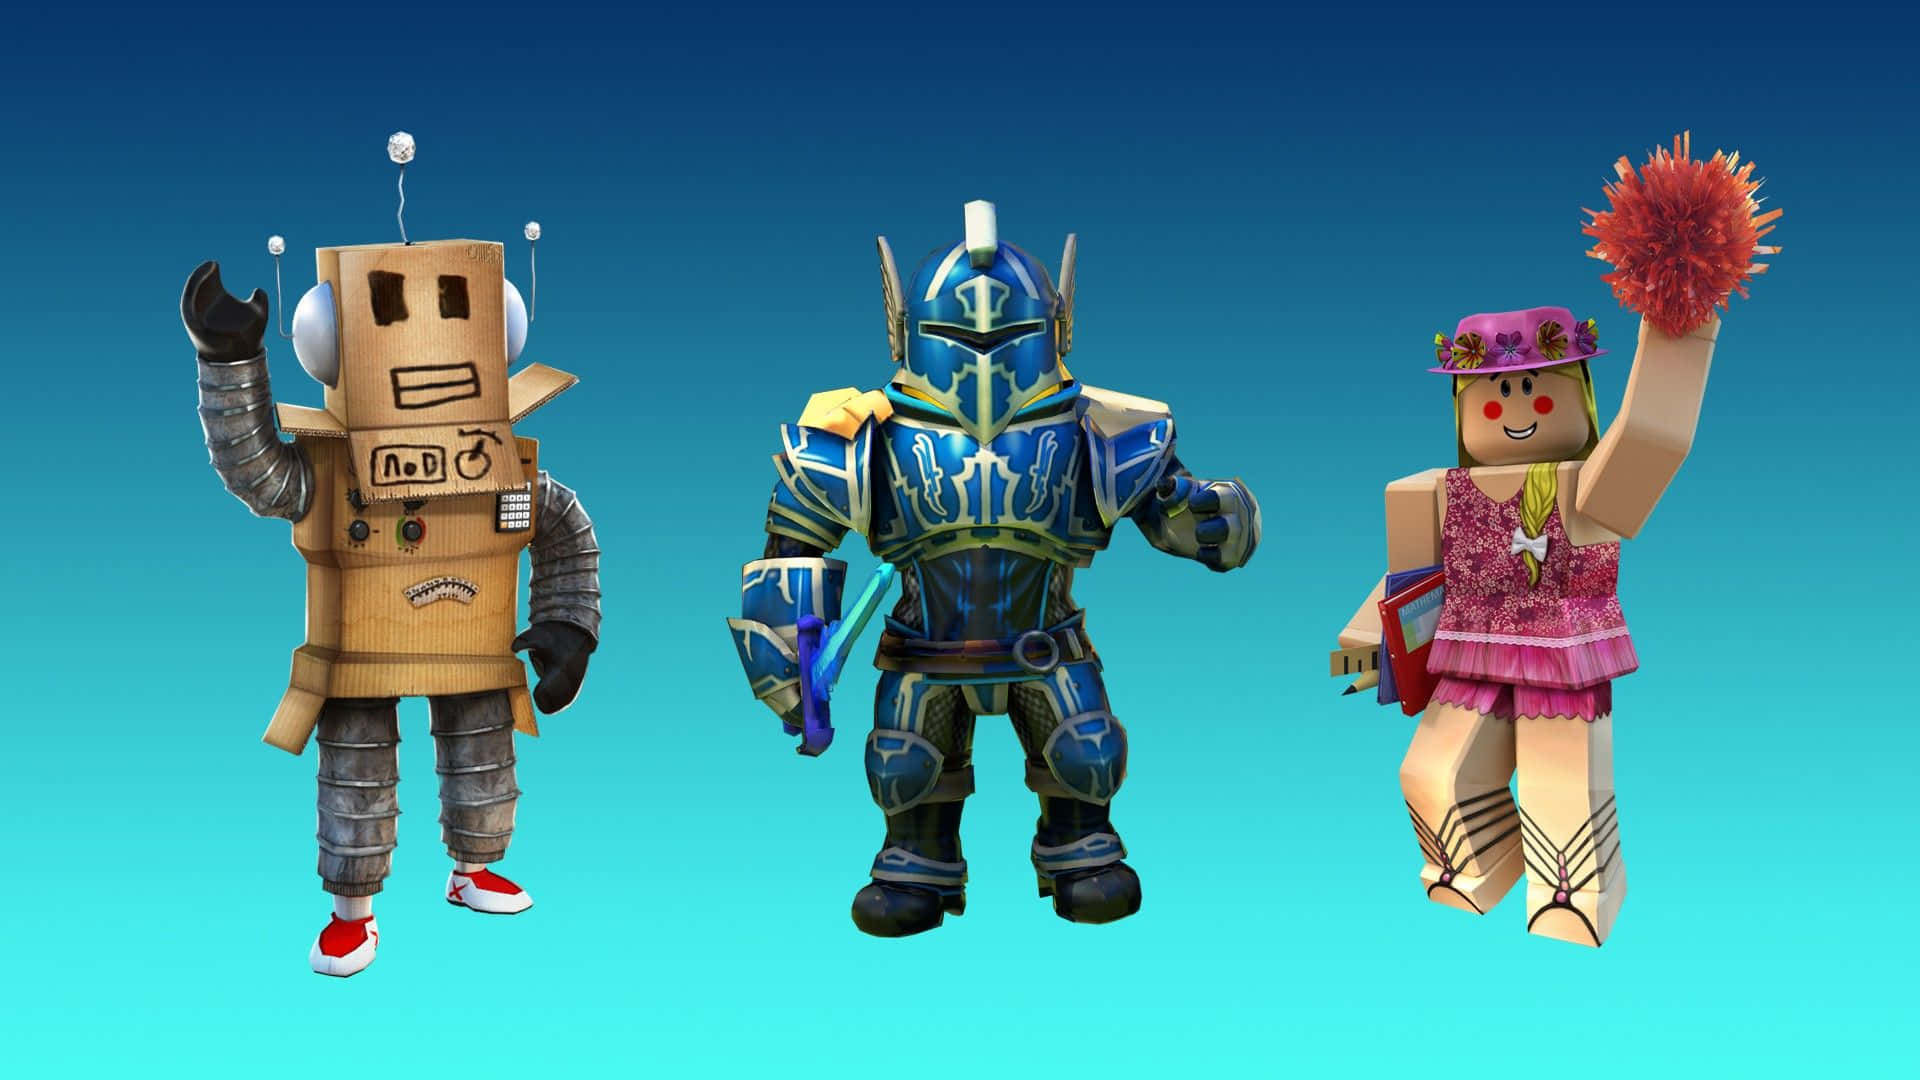 Get Ready to Explore the Intricacies of Cute Roblox!